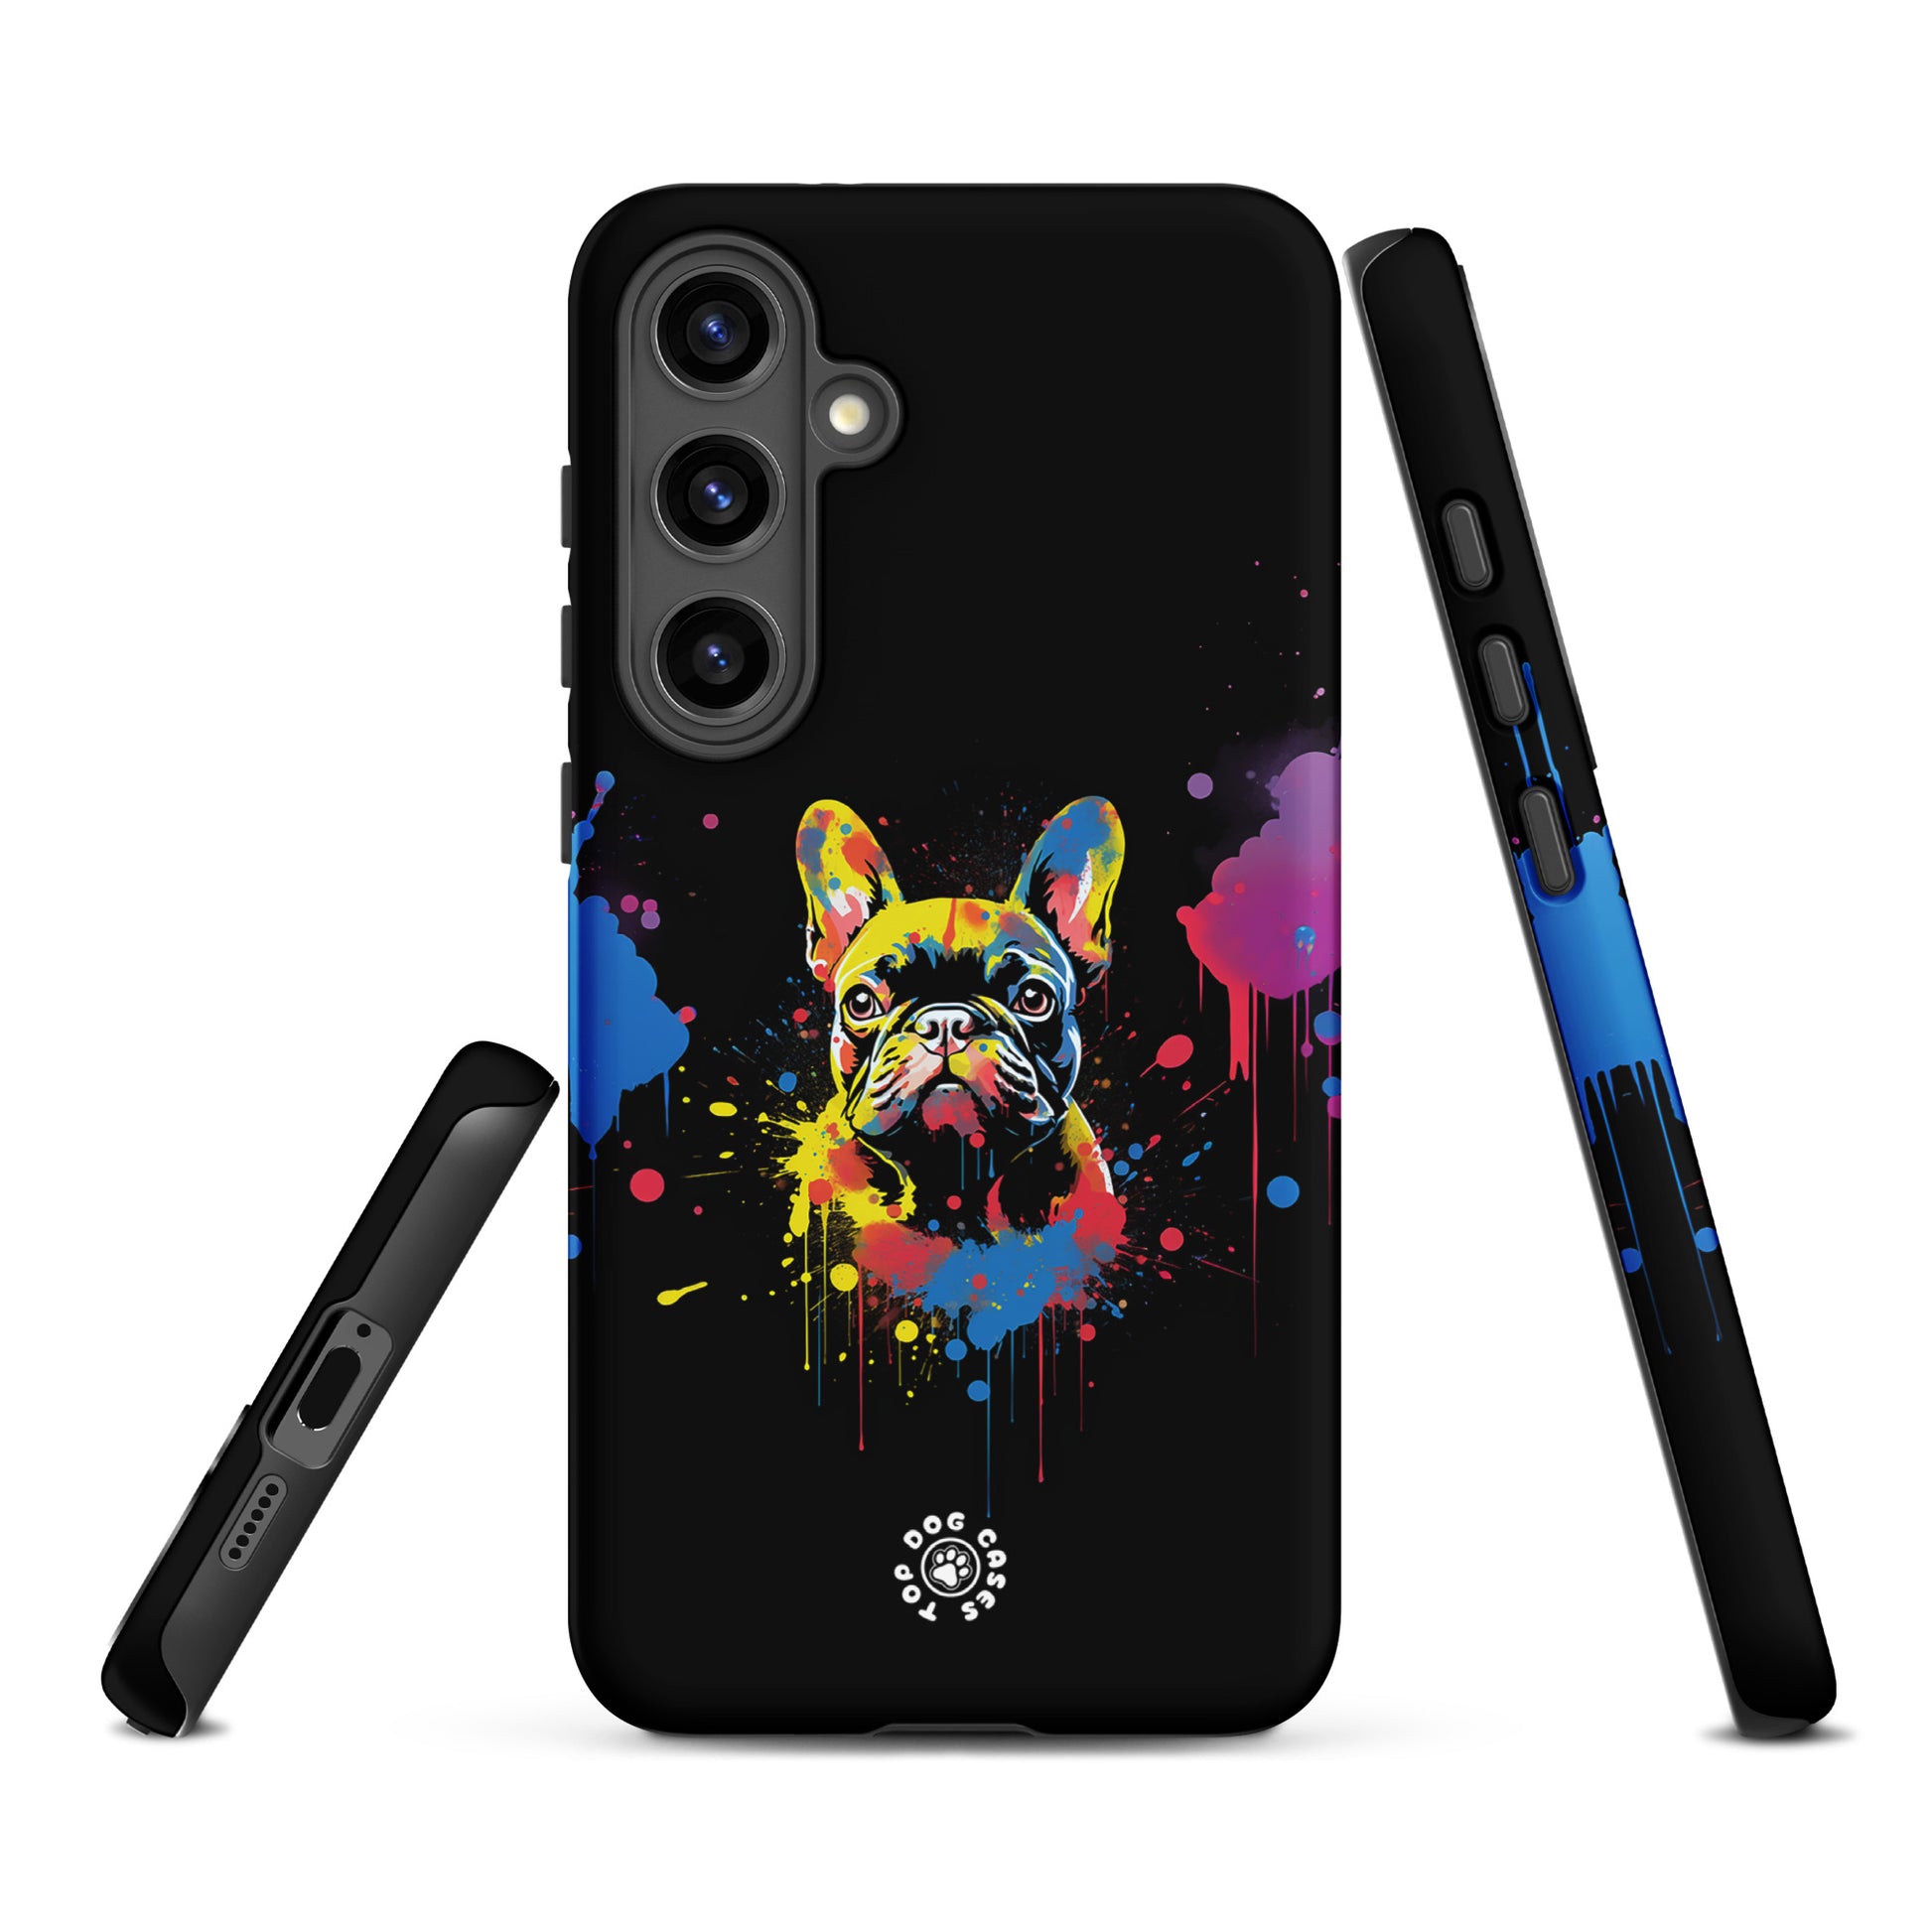 French Bulldog - Colorful Phone Case - Samsung - Top Dog Cases - #ColorfulPhoneCases, #DogPhoneCase, #dogs, #French Bulldog, #FrenchBulldog, #Samsung, #SamsungGalaxy, #SamsungGalaxyCase, #SamsungGalaxyS10, #SamsungGalaxyS20, #SamsungGalaxyS21, #SamsungGalaxyS22, #SamsungGalaxyS22Ultra, #SamsungGalaxyS23, #SamsungGalaxyS23Plus, #SamsungGalaxyS23Ultra, #SamsungPhoneCase, #ToughCase, SamsungGalaxyS20Plus, SamsungGalaxyS22Plus, SamsungGalaxyS24, SamsungGalaxyS24plus, SamsungGalaxyS24Ultra